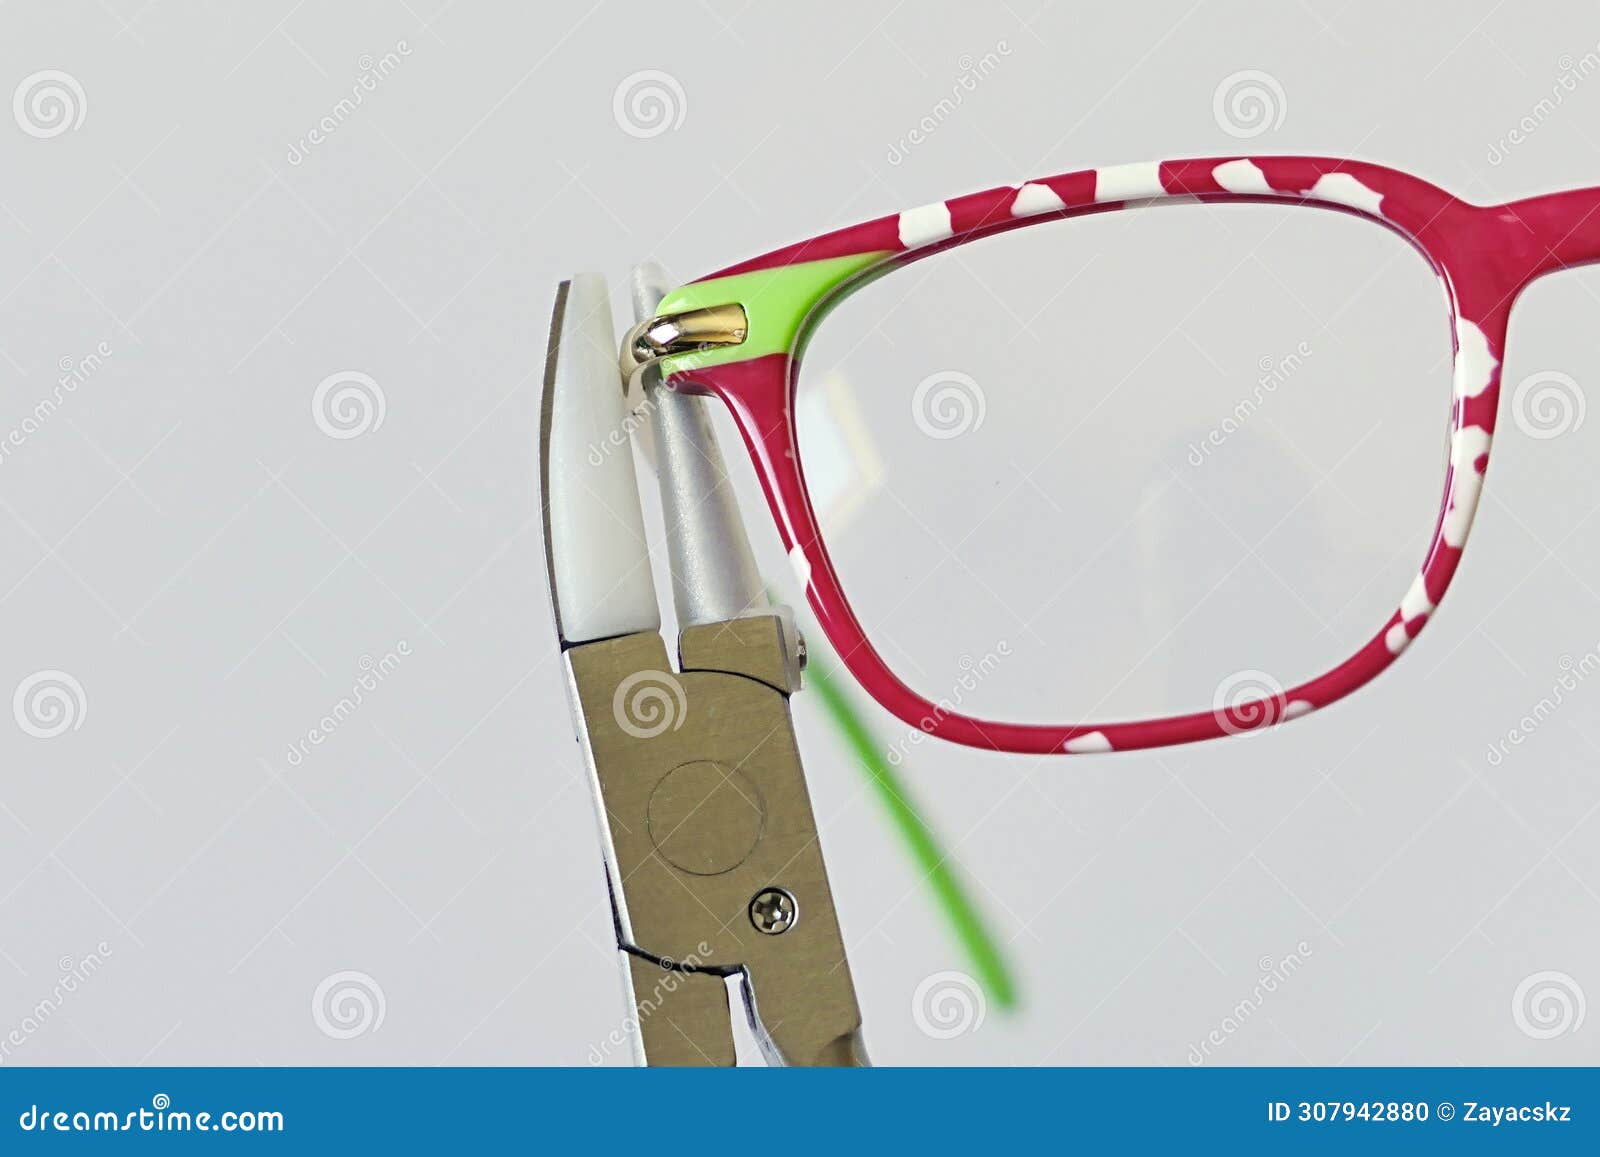 adjusting inclination on patchy red and white children eyeglass frame.